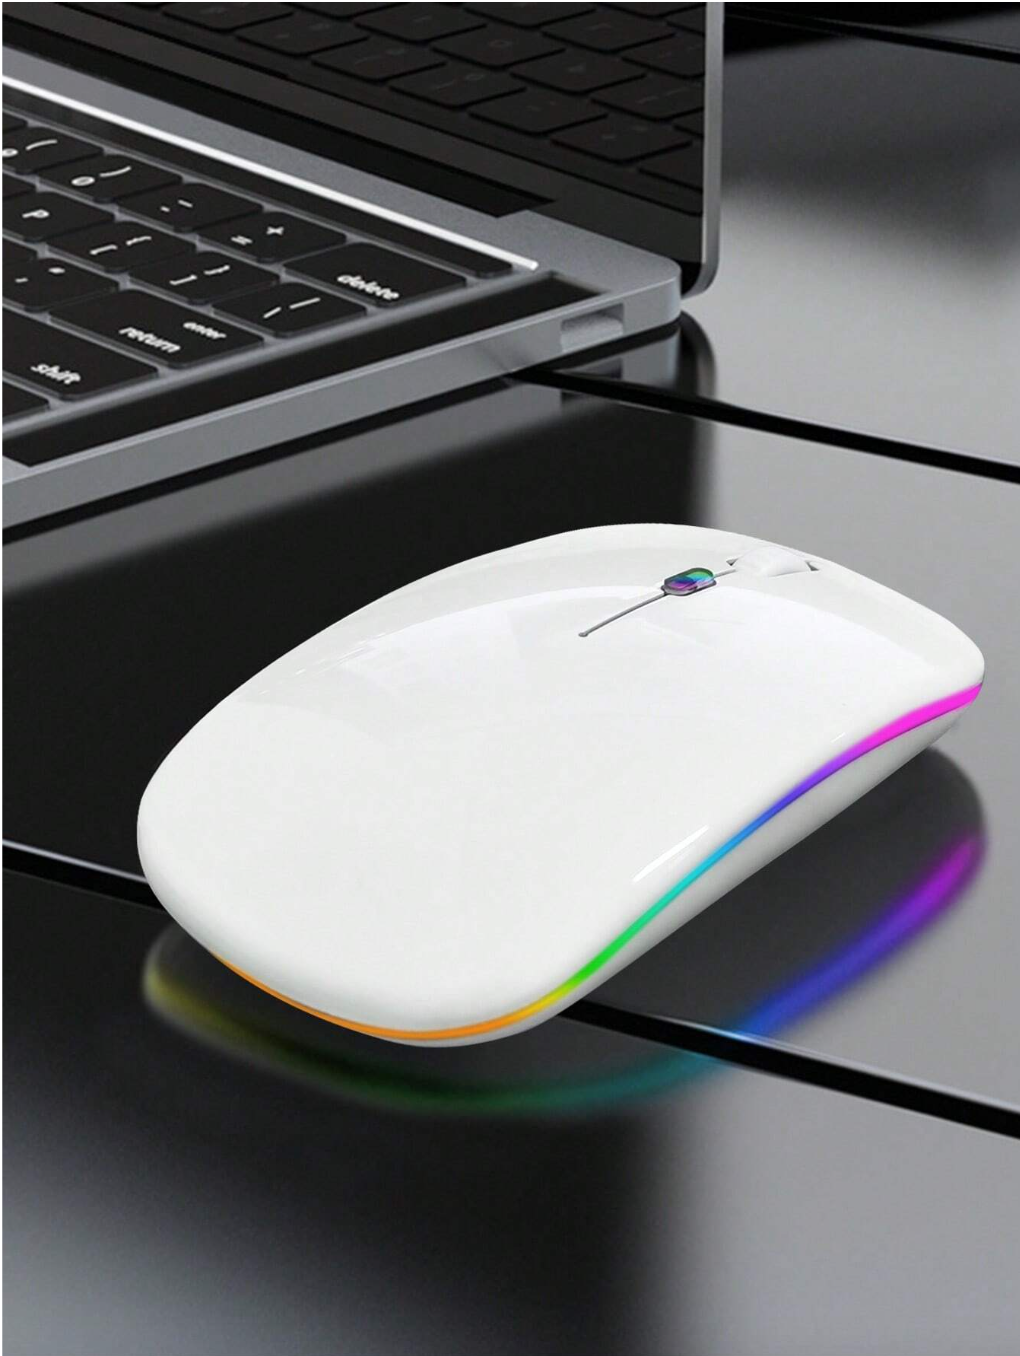 Illuminate Your Gaming Experience: The Whisper-quiet Magic of RGB Light Silent Wireless Gaming Mouse!